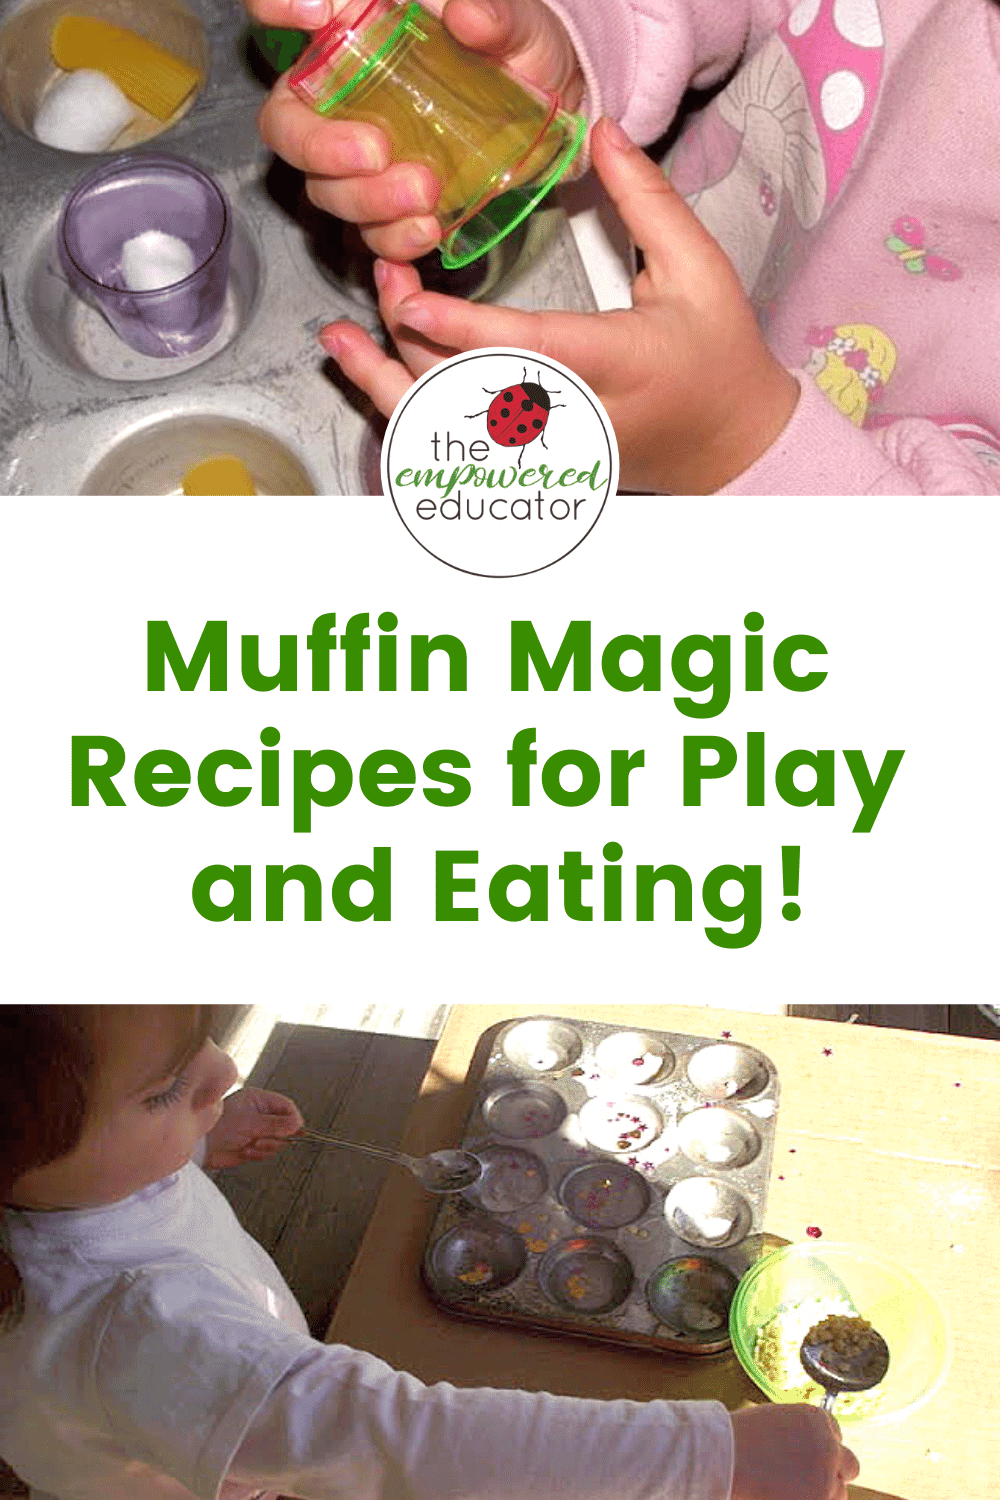 muffin magic recipes for play and eating